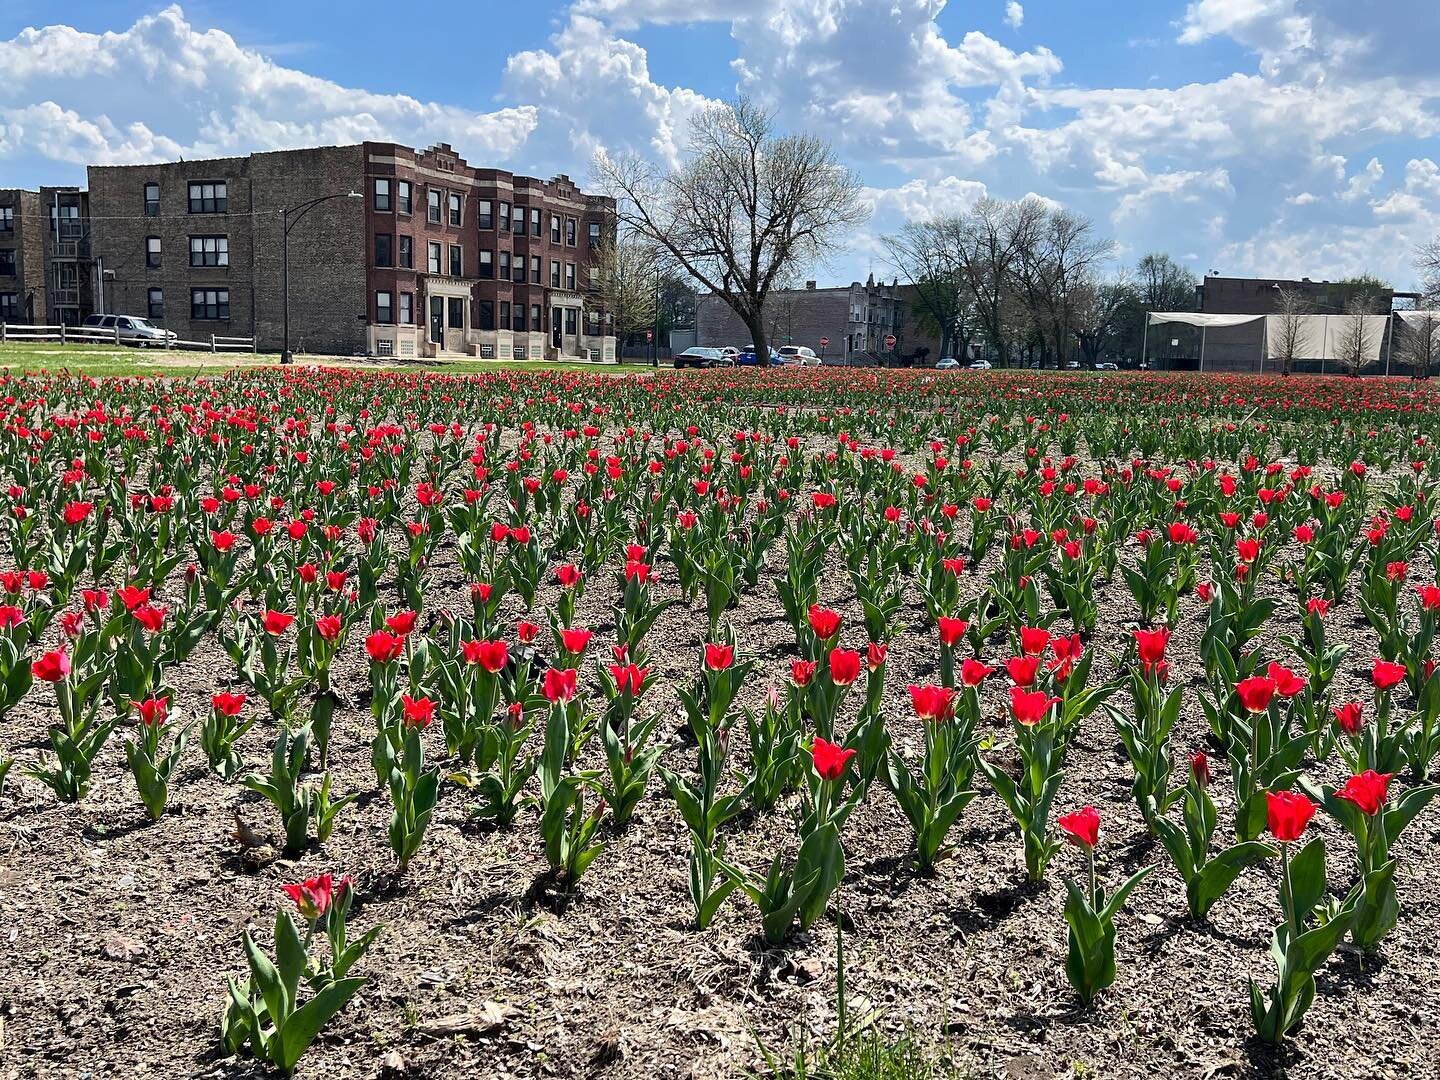 Tulips are popping in Washington Park! Come by E 53rd St &amp; S Prairie Ave to walk amongst the 100,000 red flowers. If you visit, please be mindful of the neighbors. 

We also hope to see you for the Blooming in Bronzeville celebration on April 29,